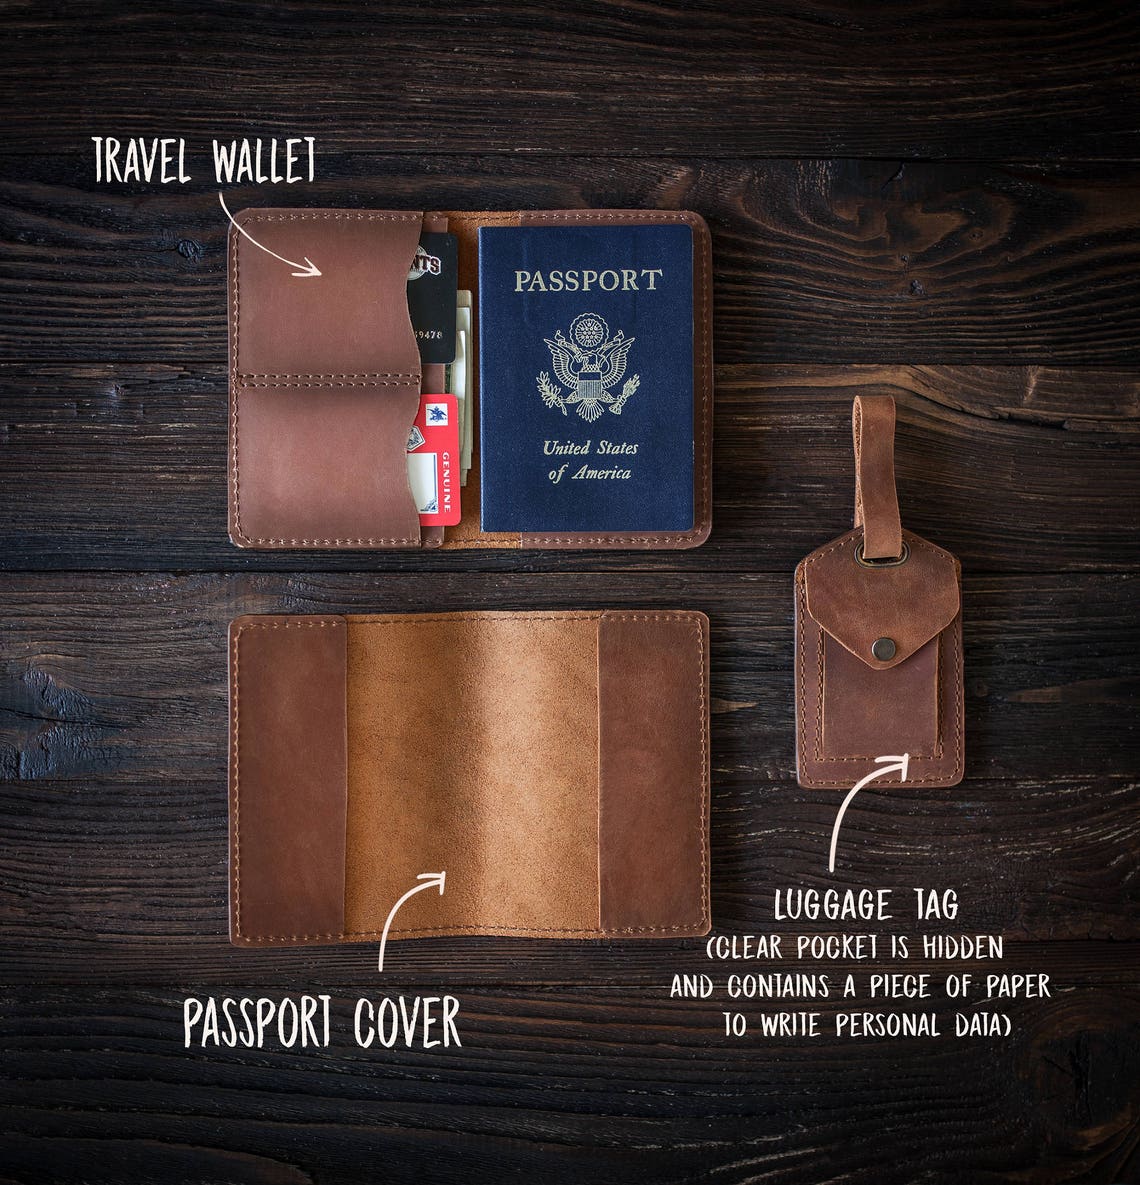 Passport Cover / Travel Wallet / Luggage tag